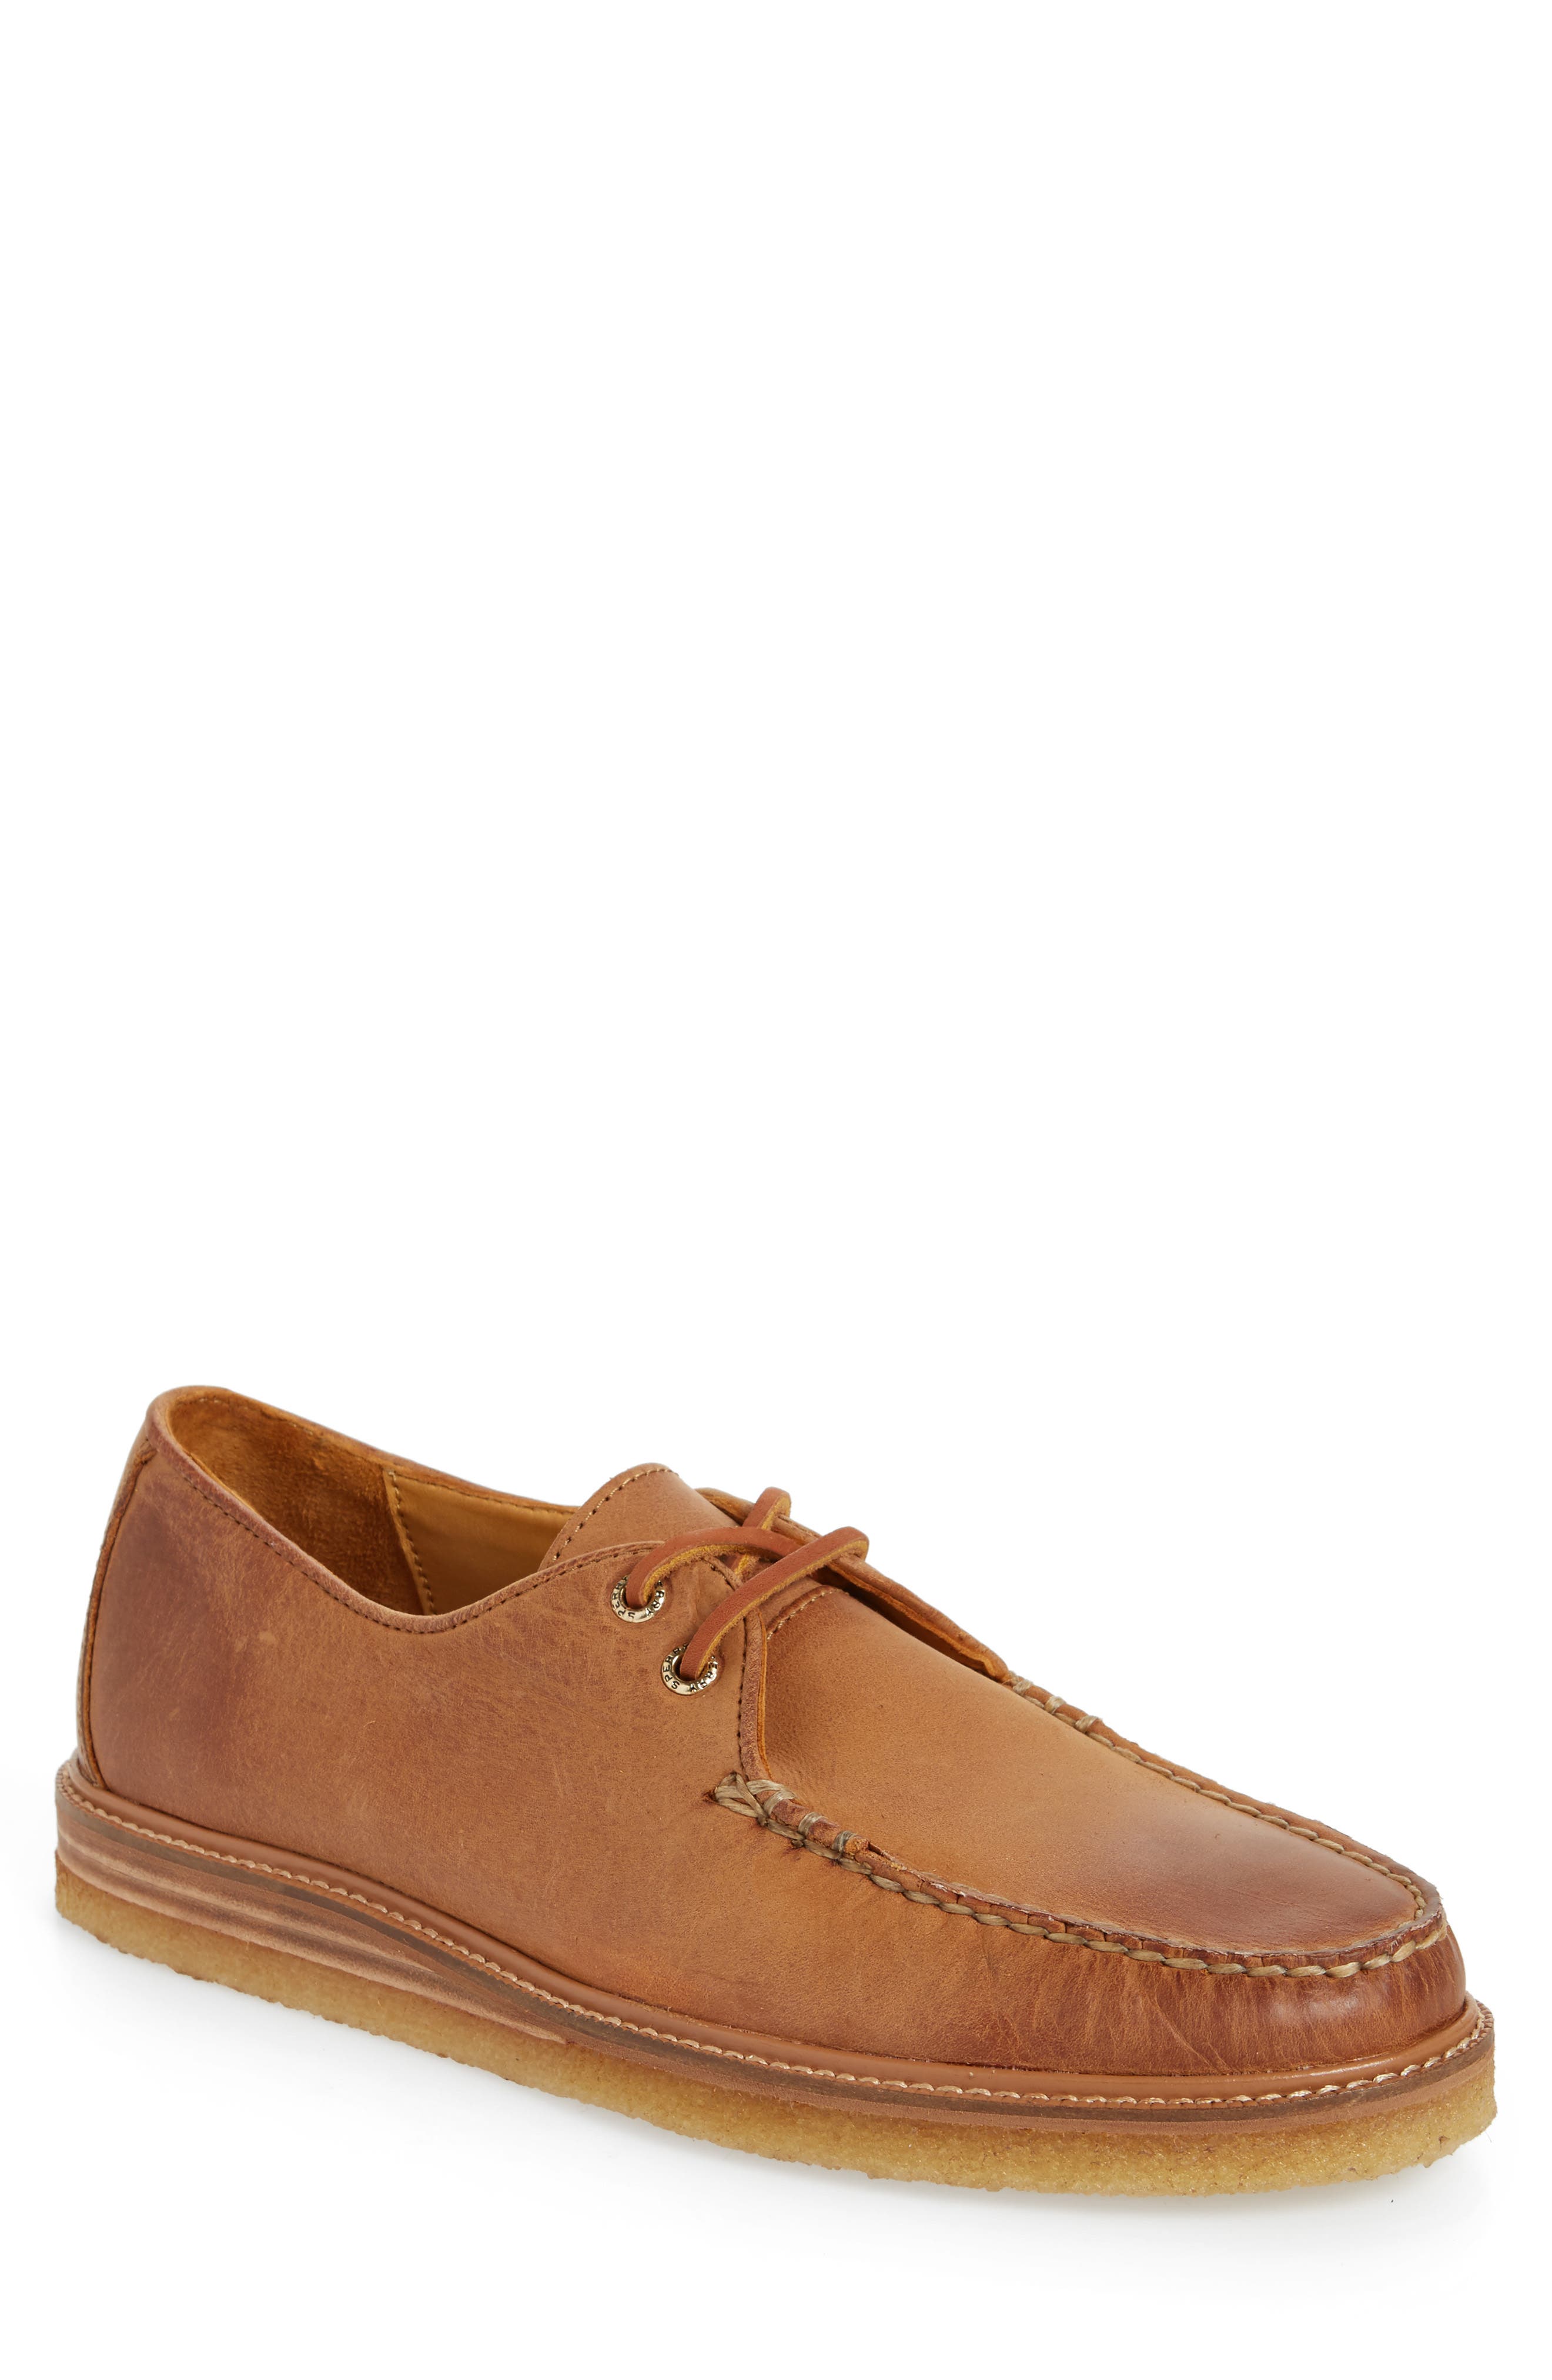 sperry gold cup captain's crepe oxford